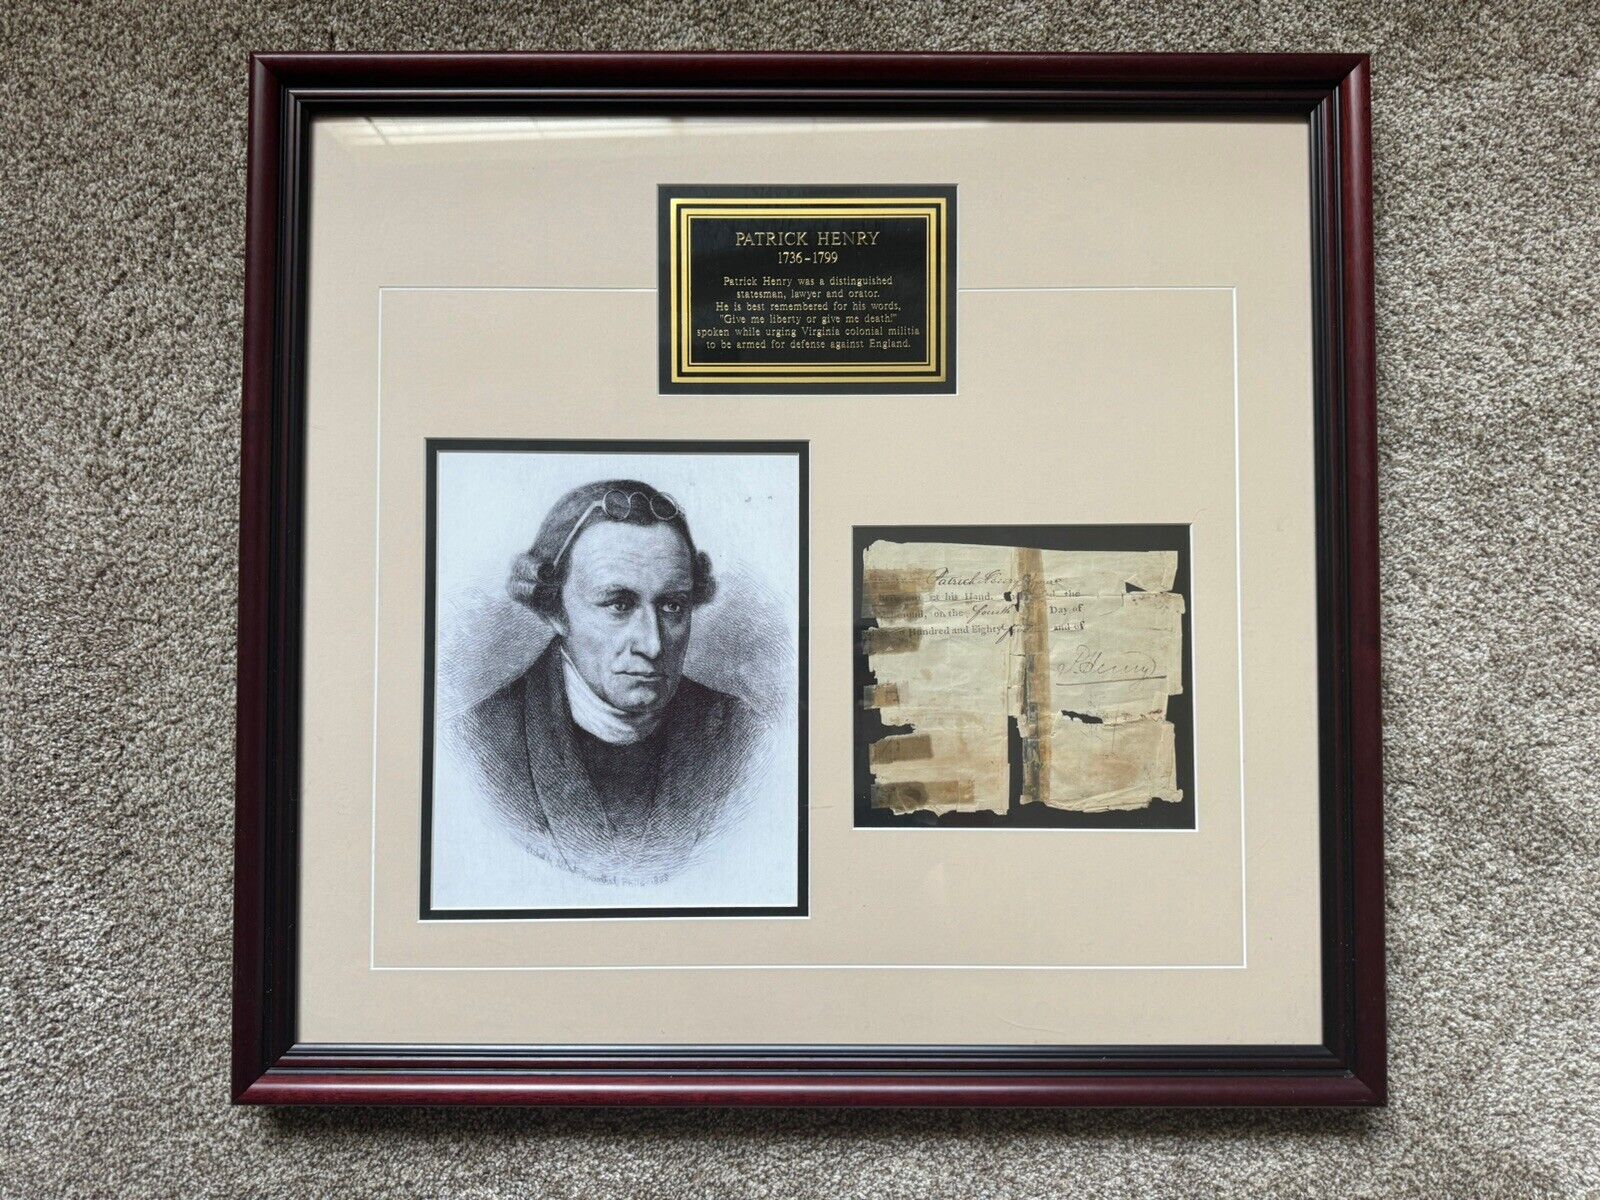 Authentic Patrick Henry 1785 Signature “GIVE ME LIBERTY OR GIVE ME DEATH”